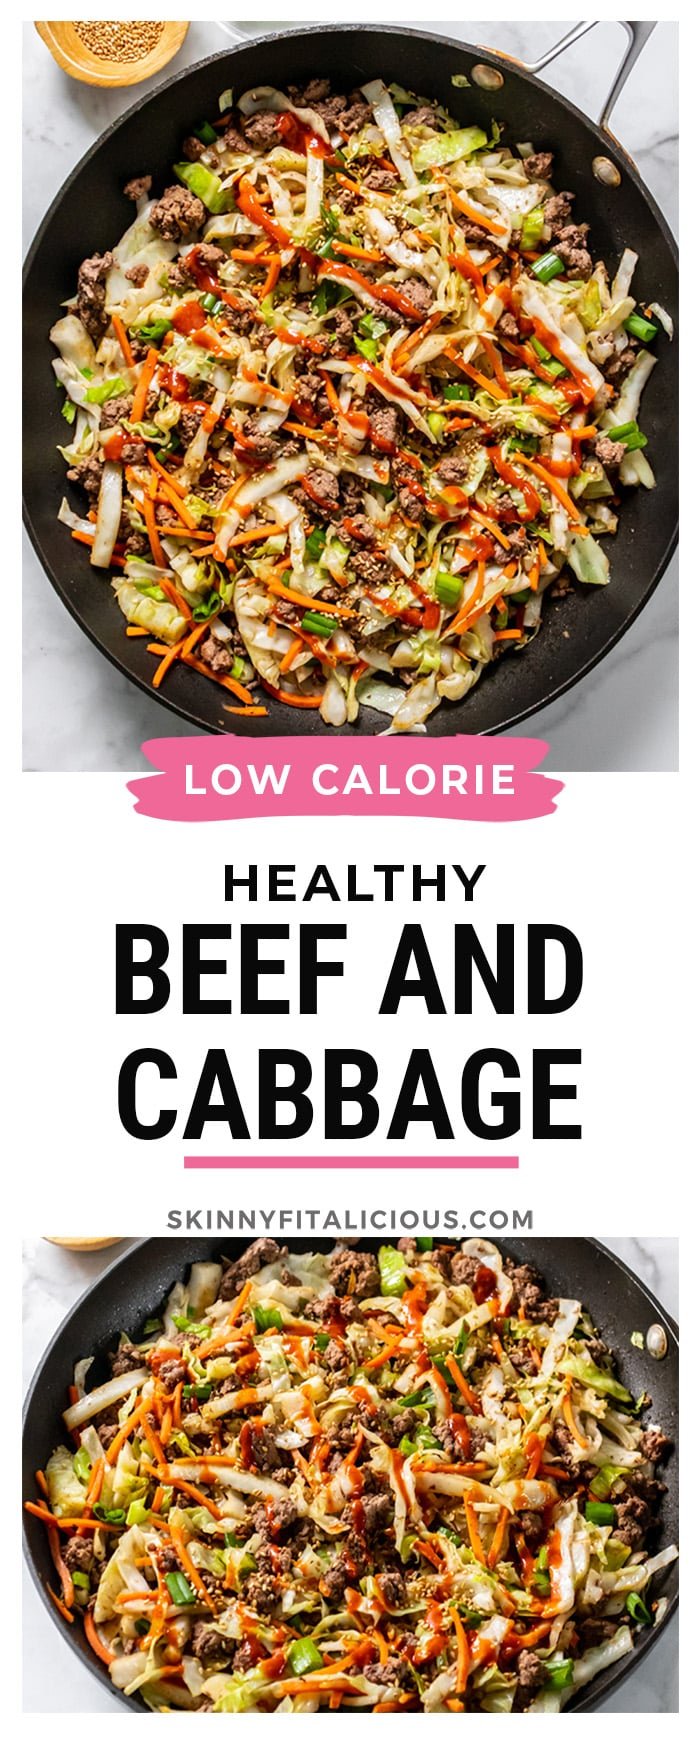 Low Calorie Beef Cabbage Bowls are a deconstructed version of cabbage rolls that is easy to make on the stovetop!